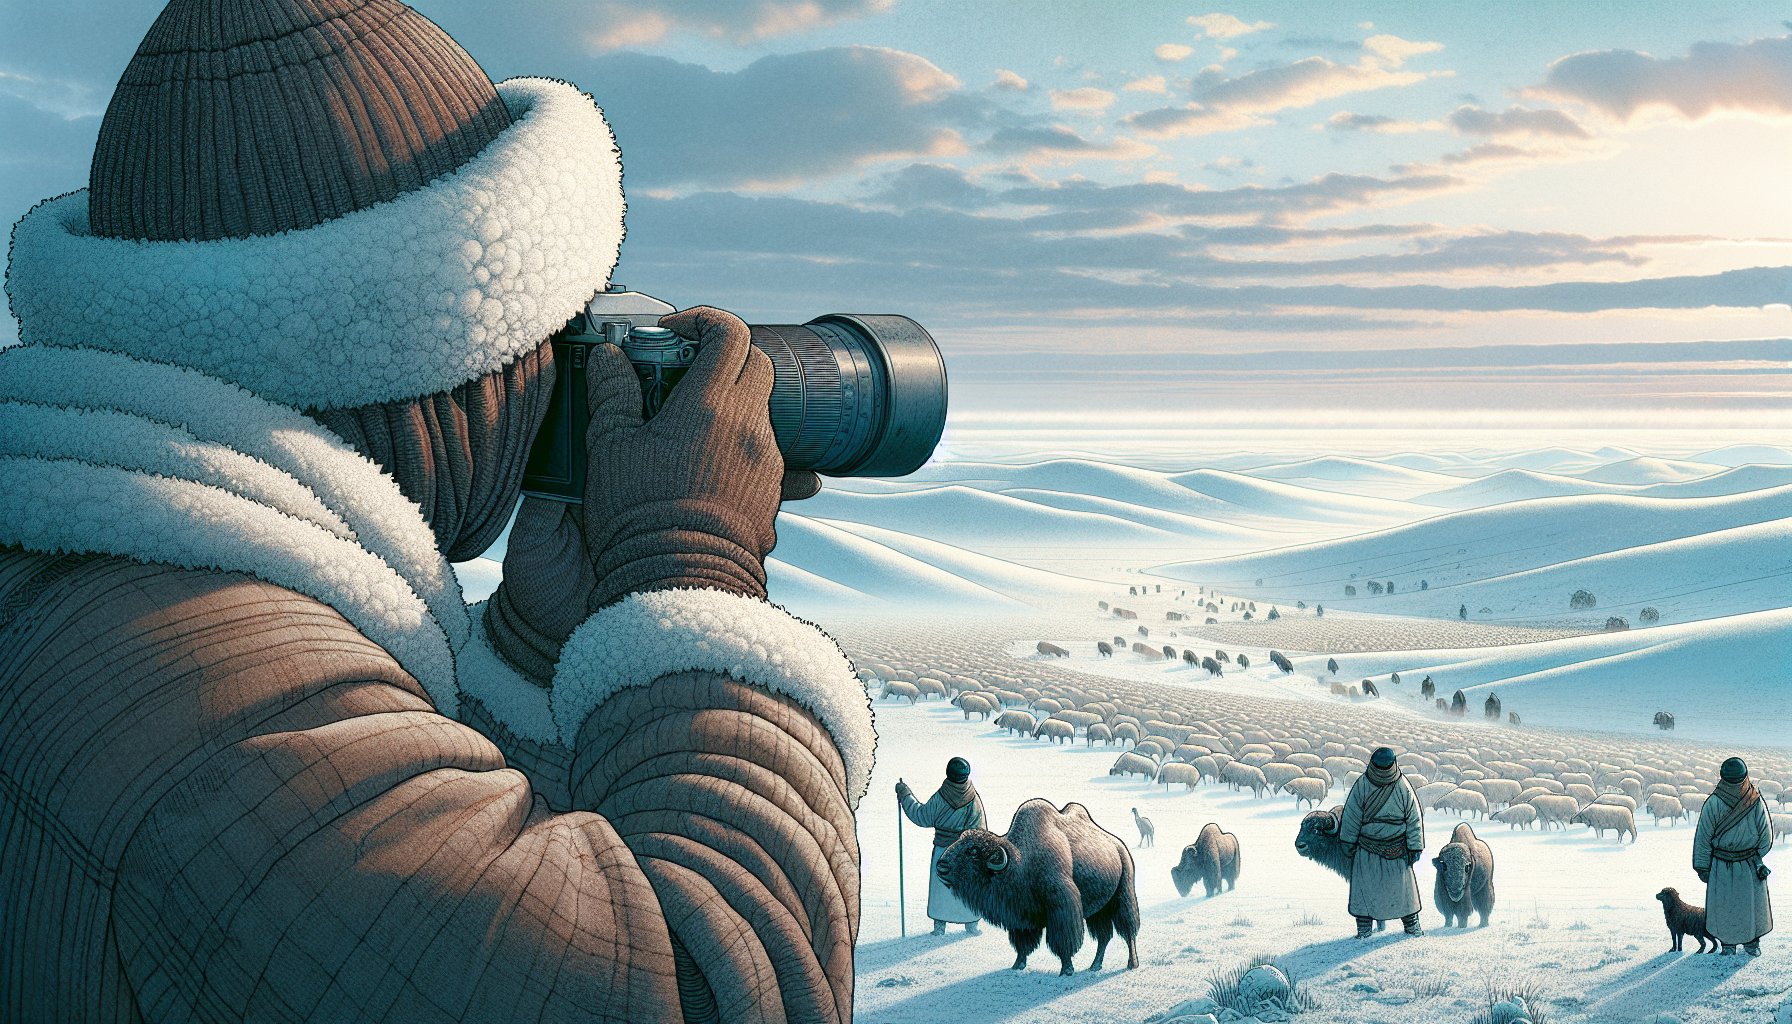 Capturing the frozen beauty of Mongolia's winter